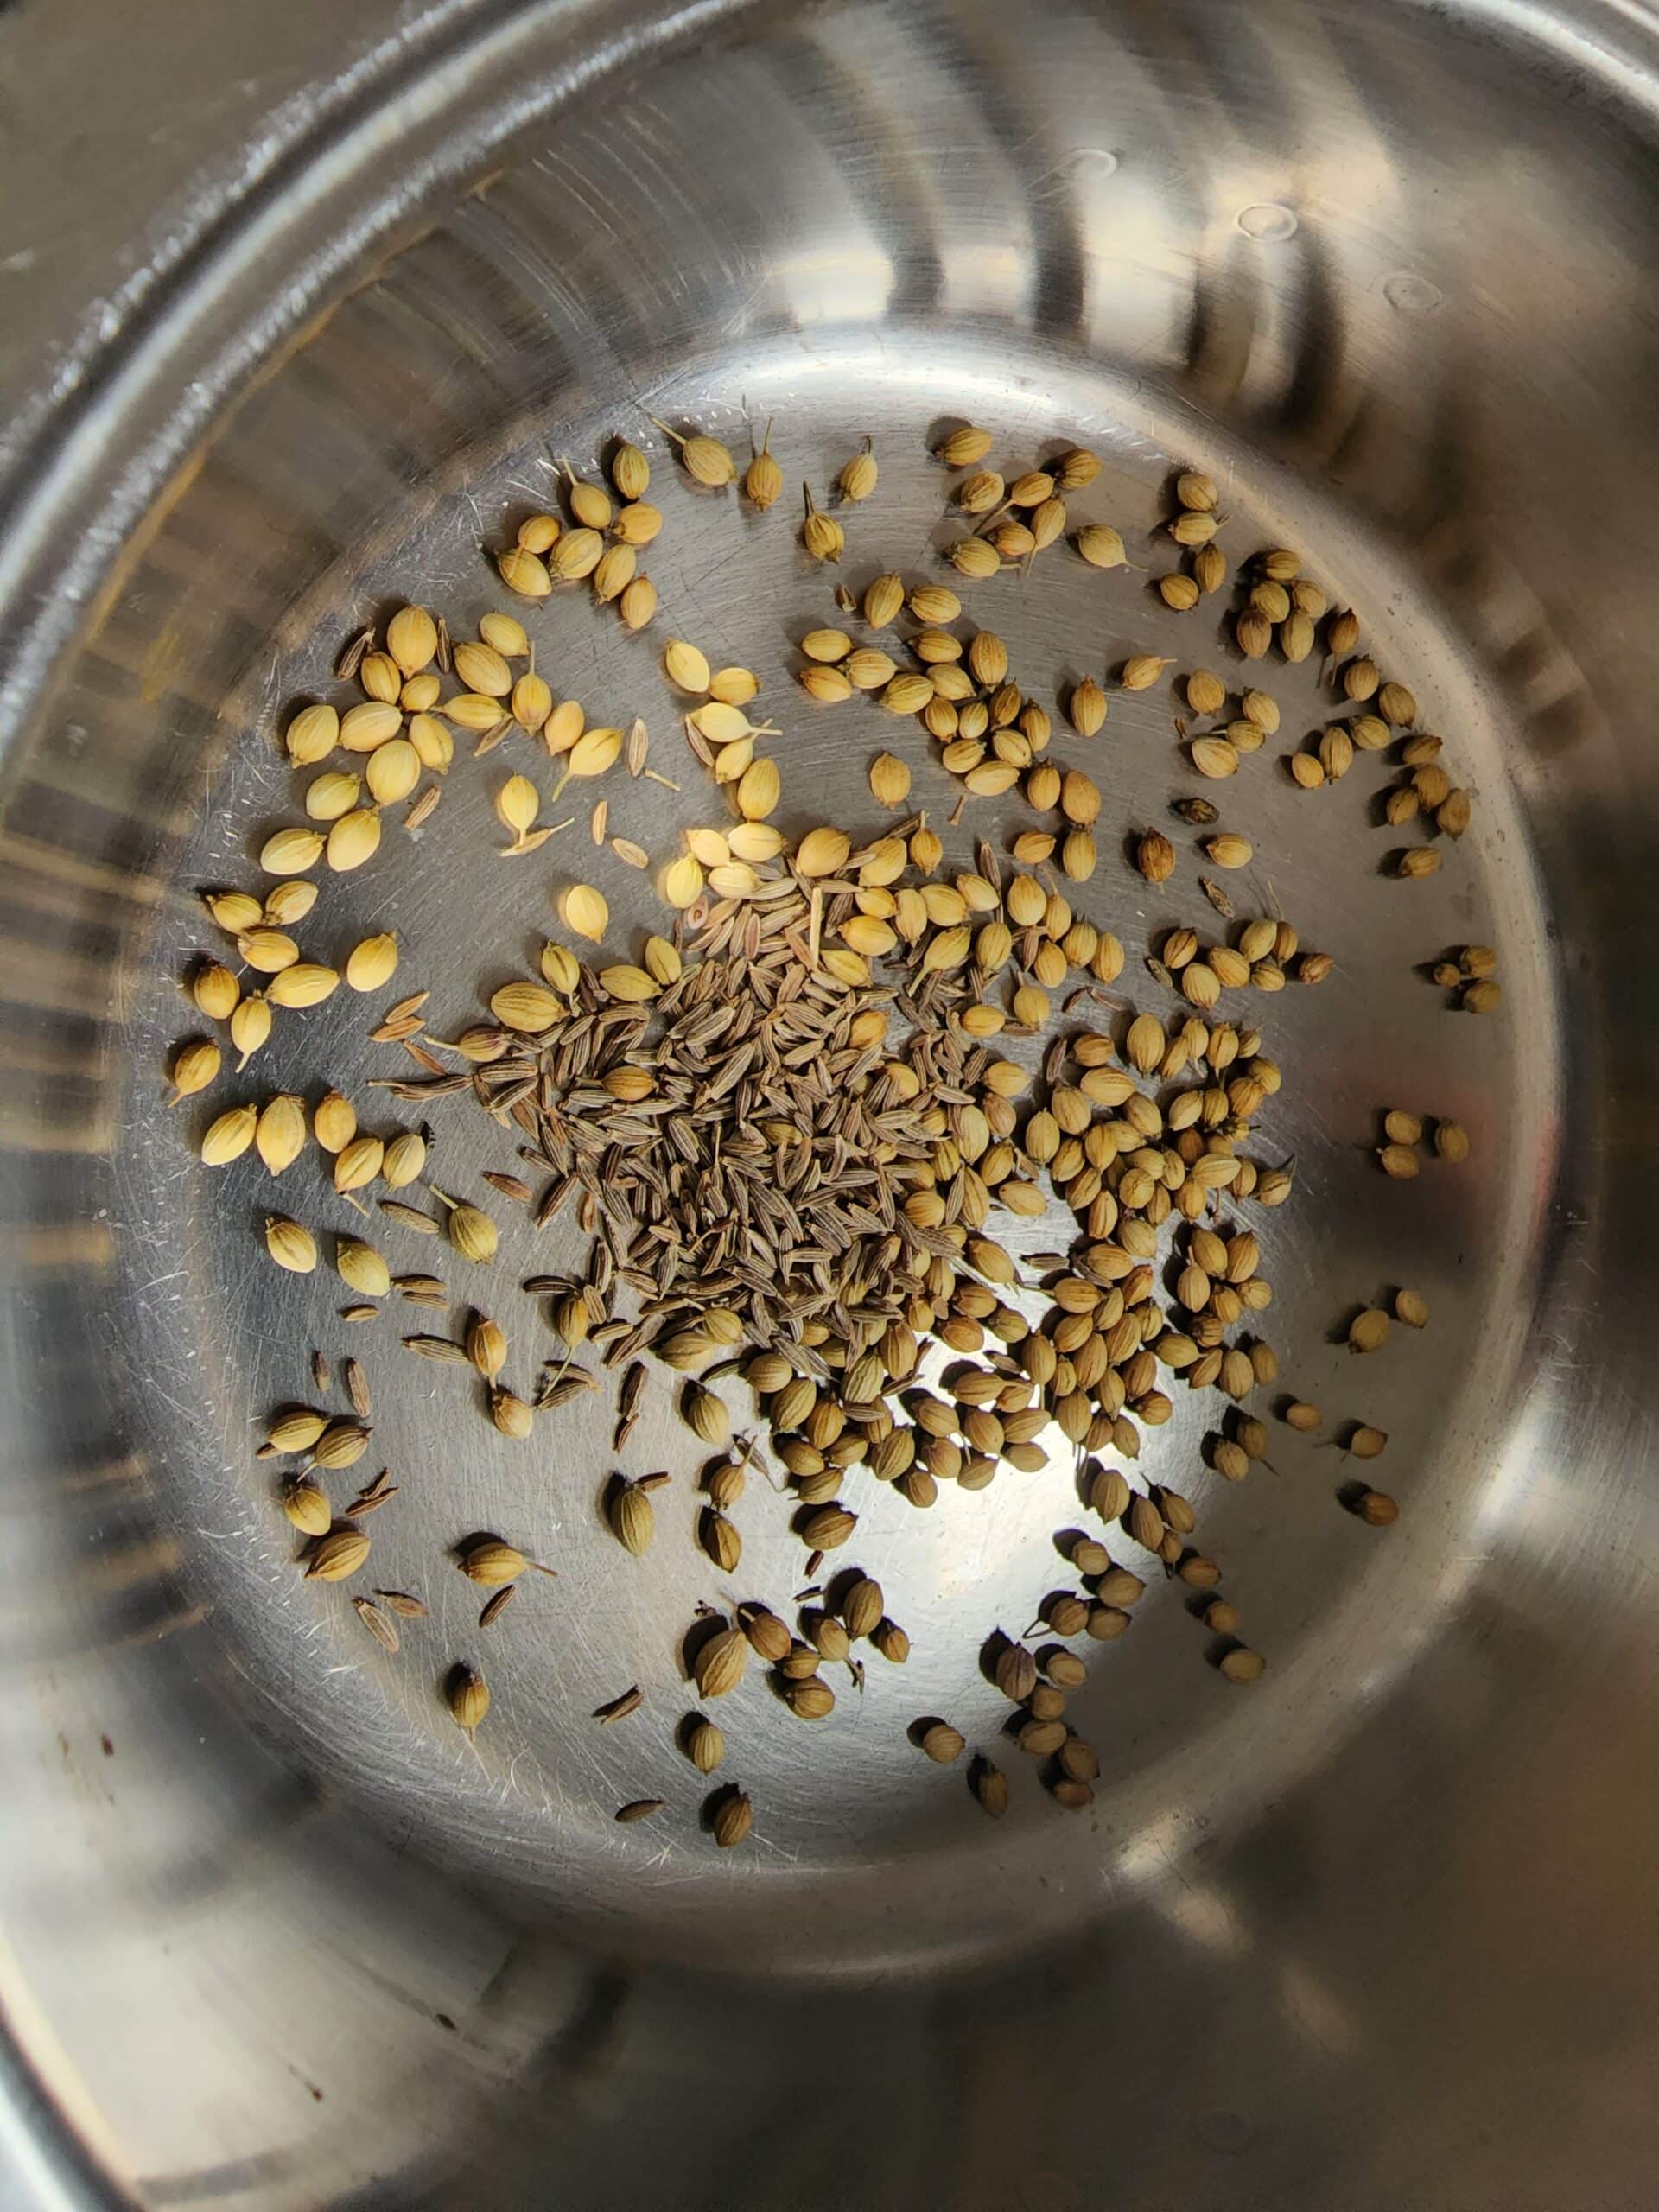 dhania and cumin seeds tasted